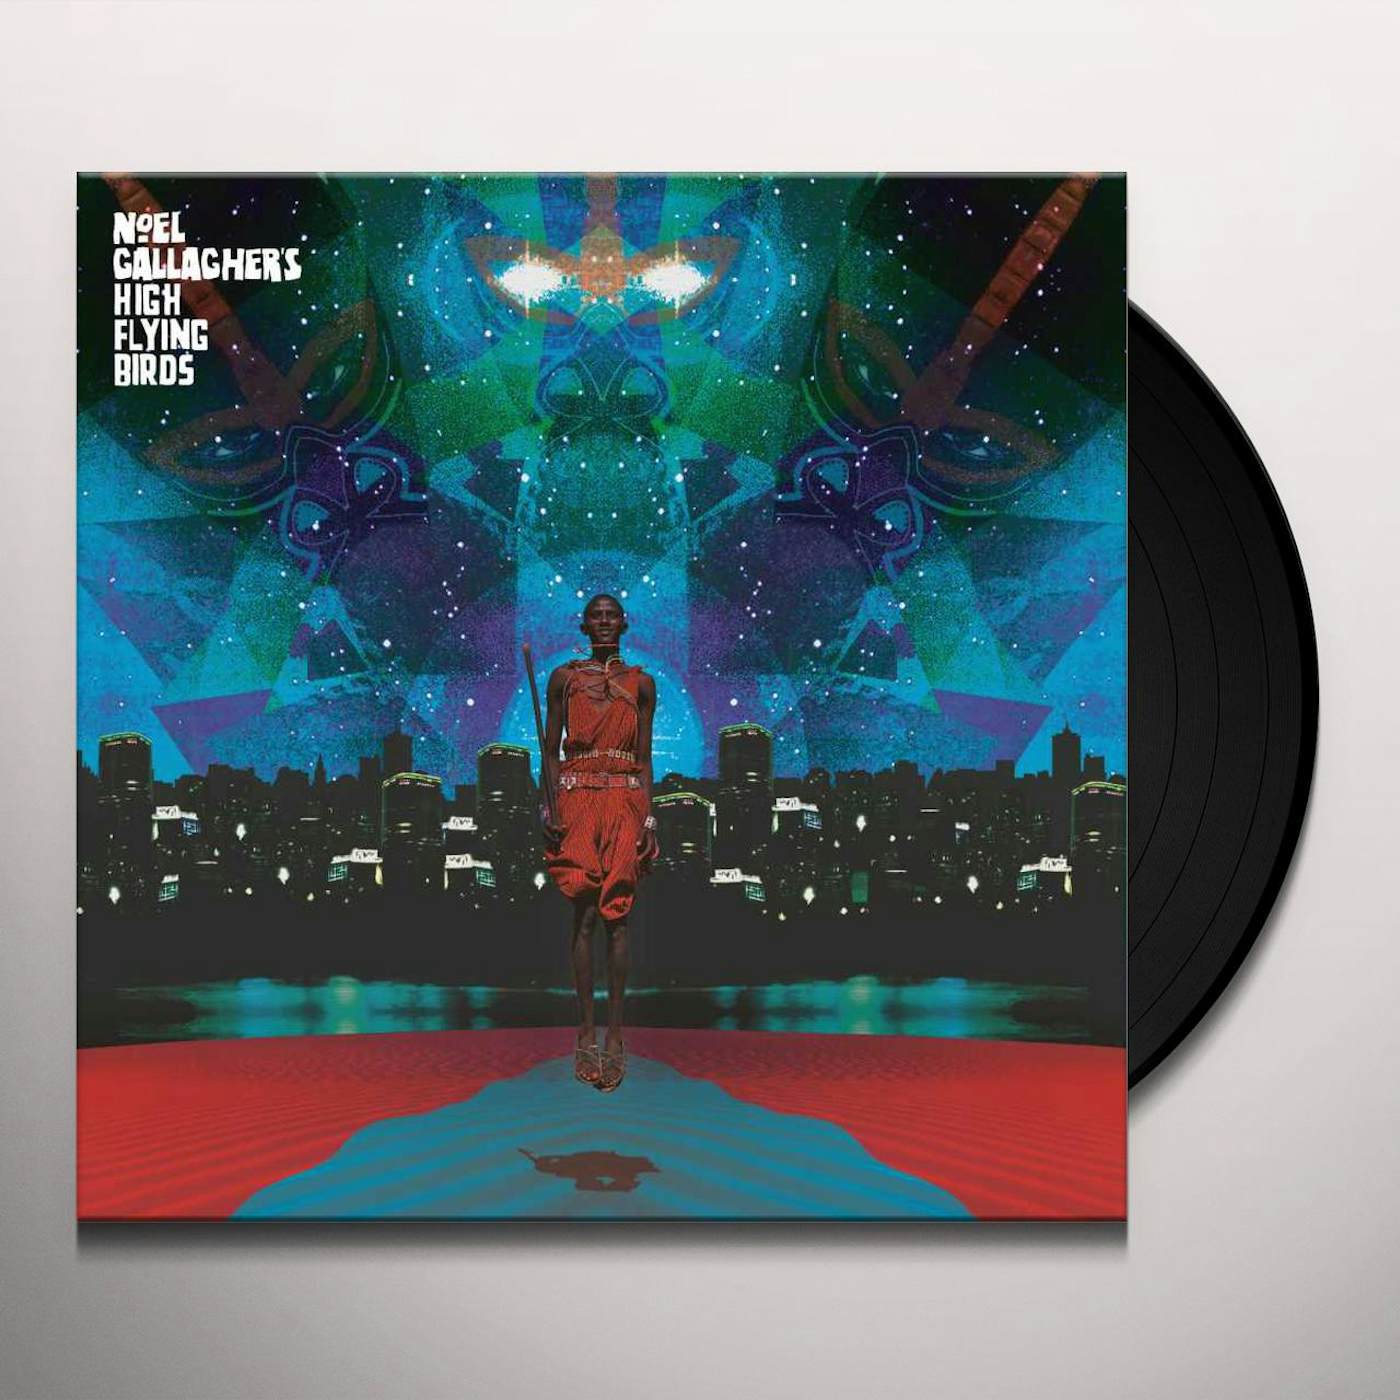 Noel Gallagher's High Flying Birds This Is The Place (LP) Vinyl Record